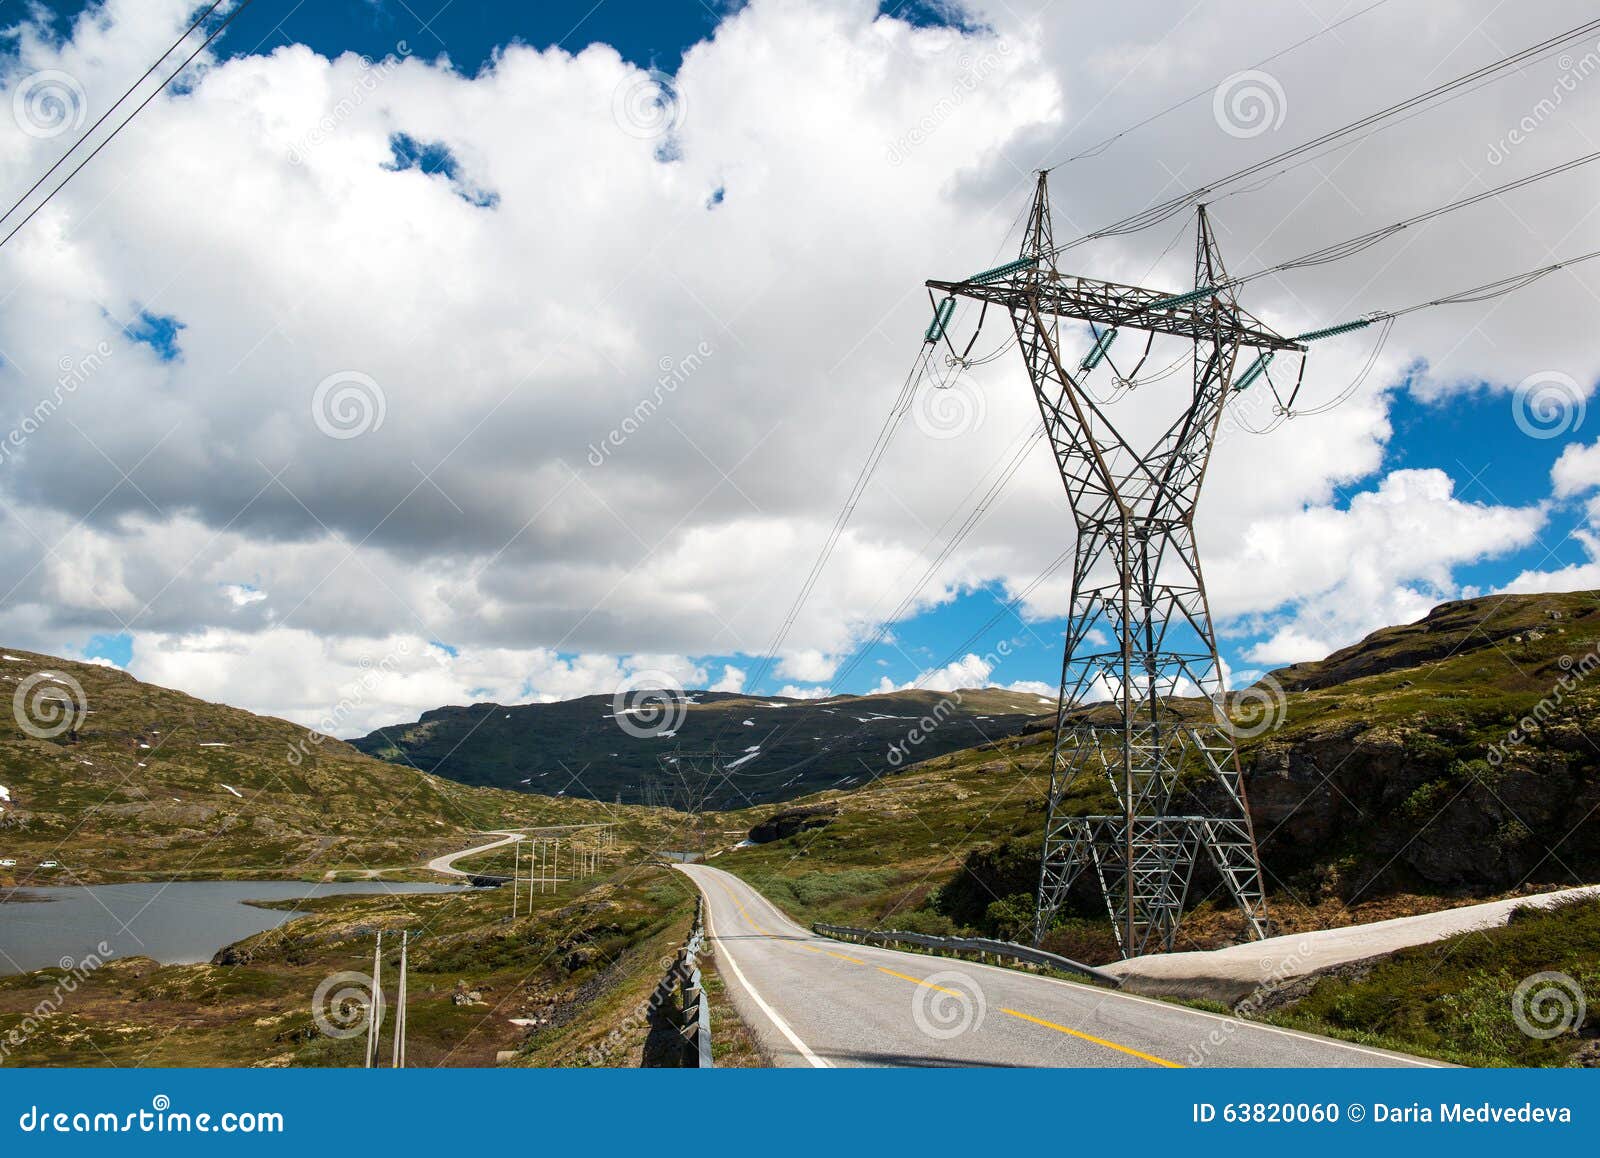 landscape with mountain road and high voltage reliance line, norway